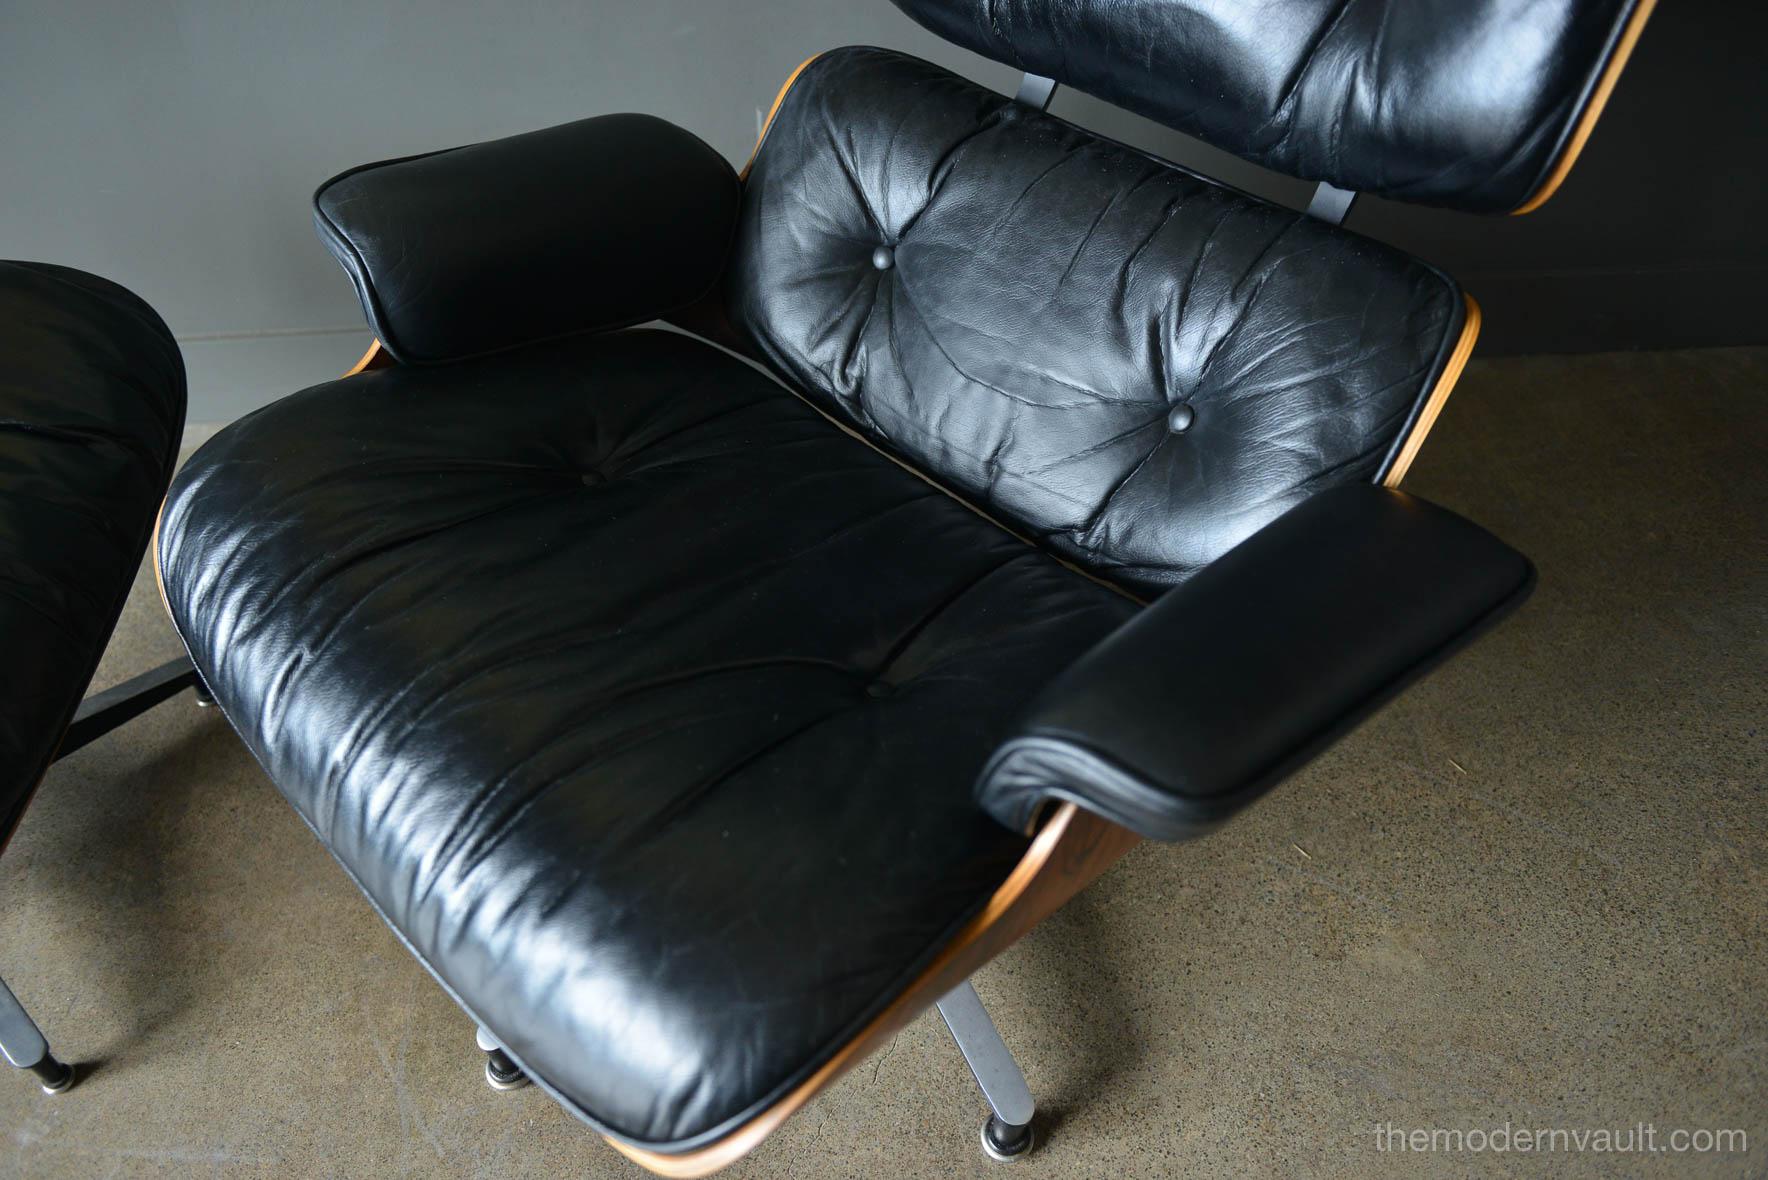 American Eames Rosewood Lounge Chair and Ottoman, circa 1971